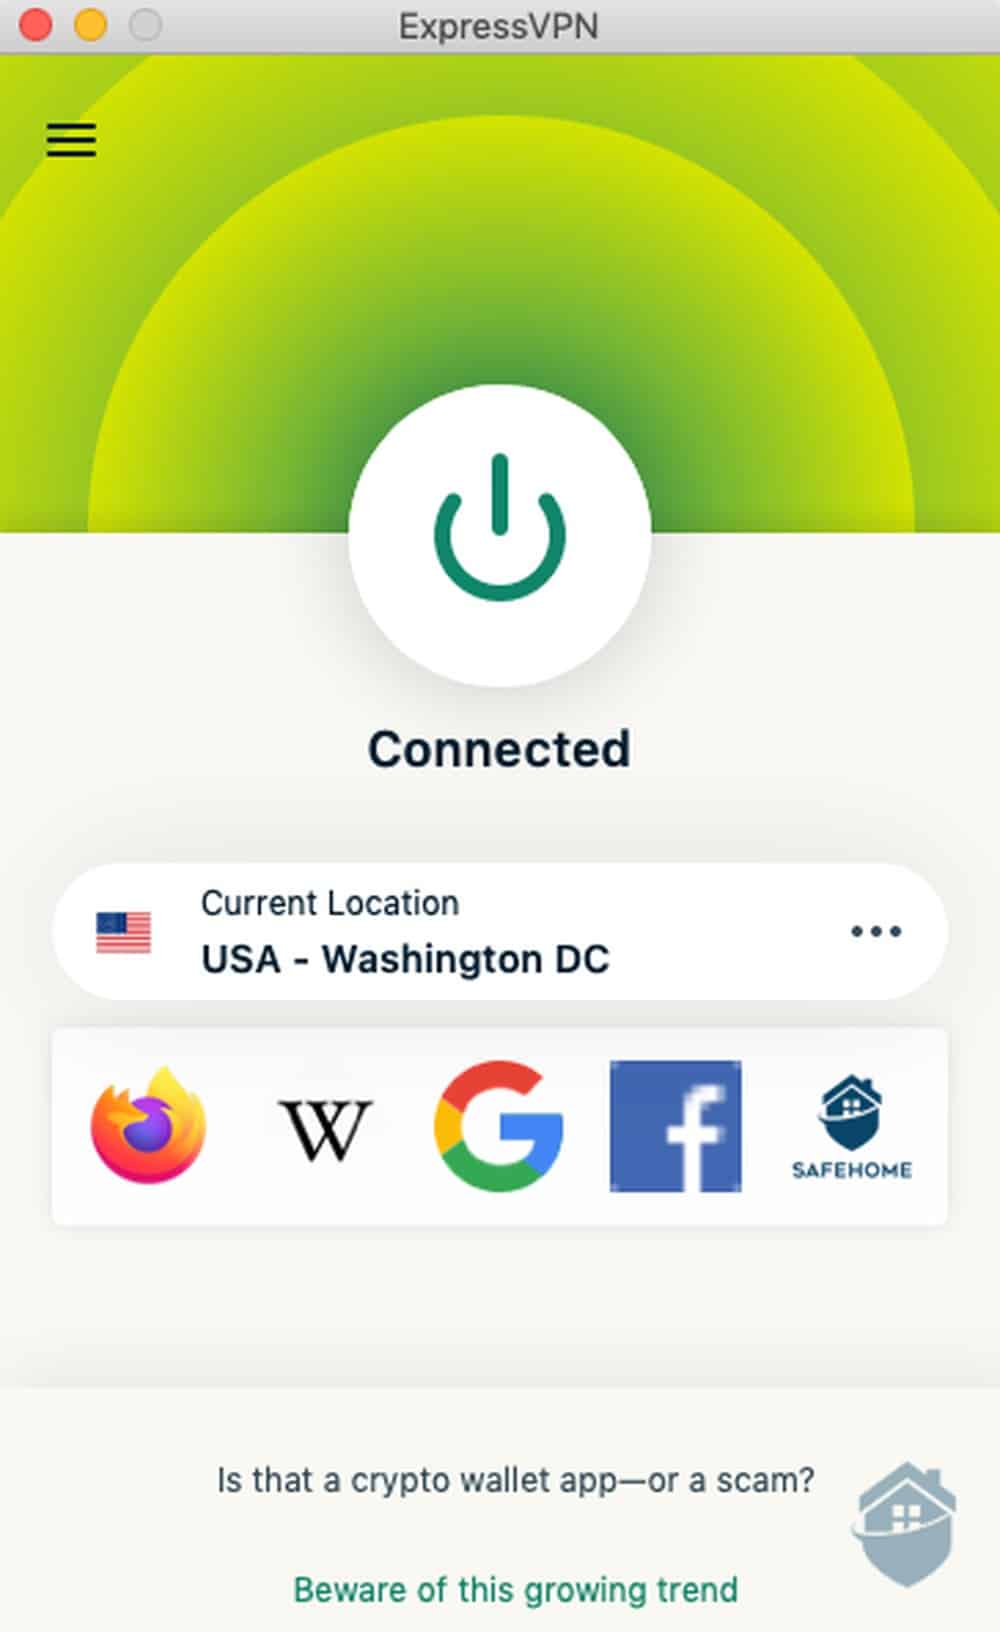 Connected to ExpressVPN